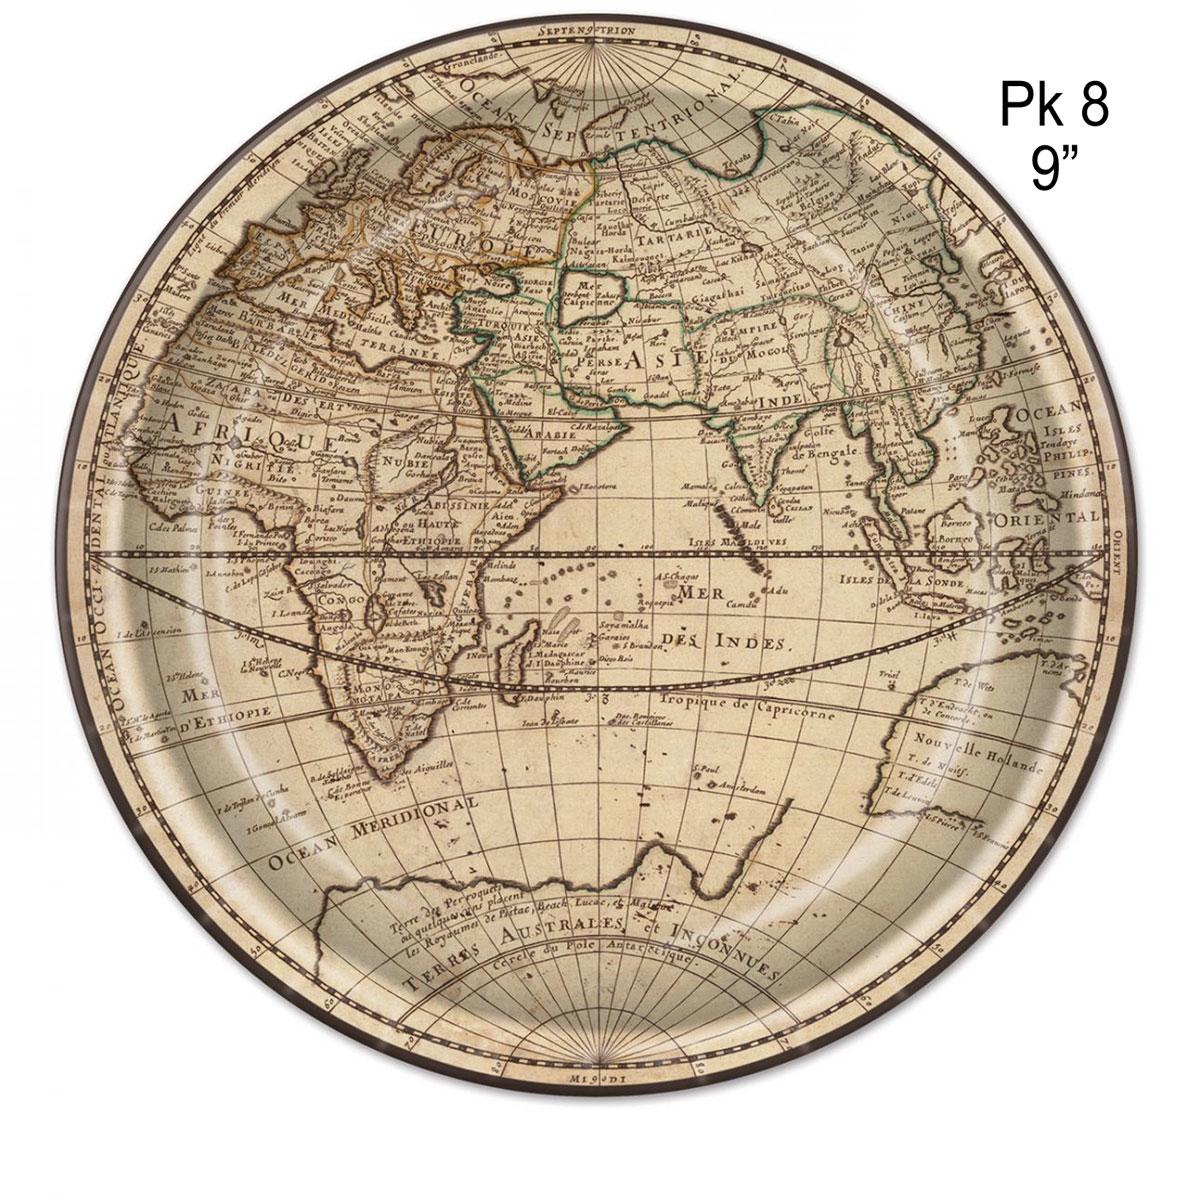 Around the World Paper Plates 9" - pk8 by Besitle 59984 available in the UK here at Karnival Costumes online party shop